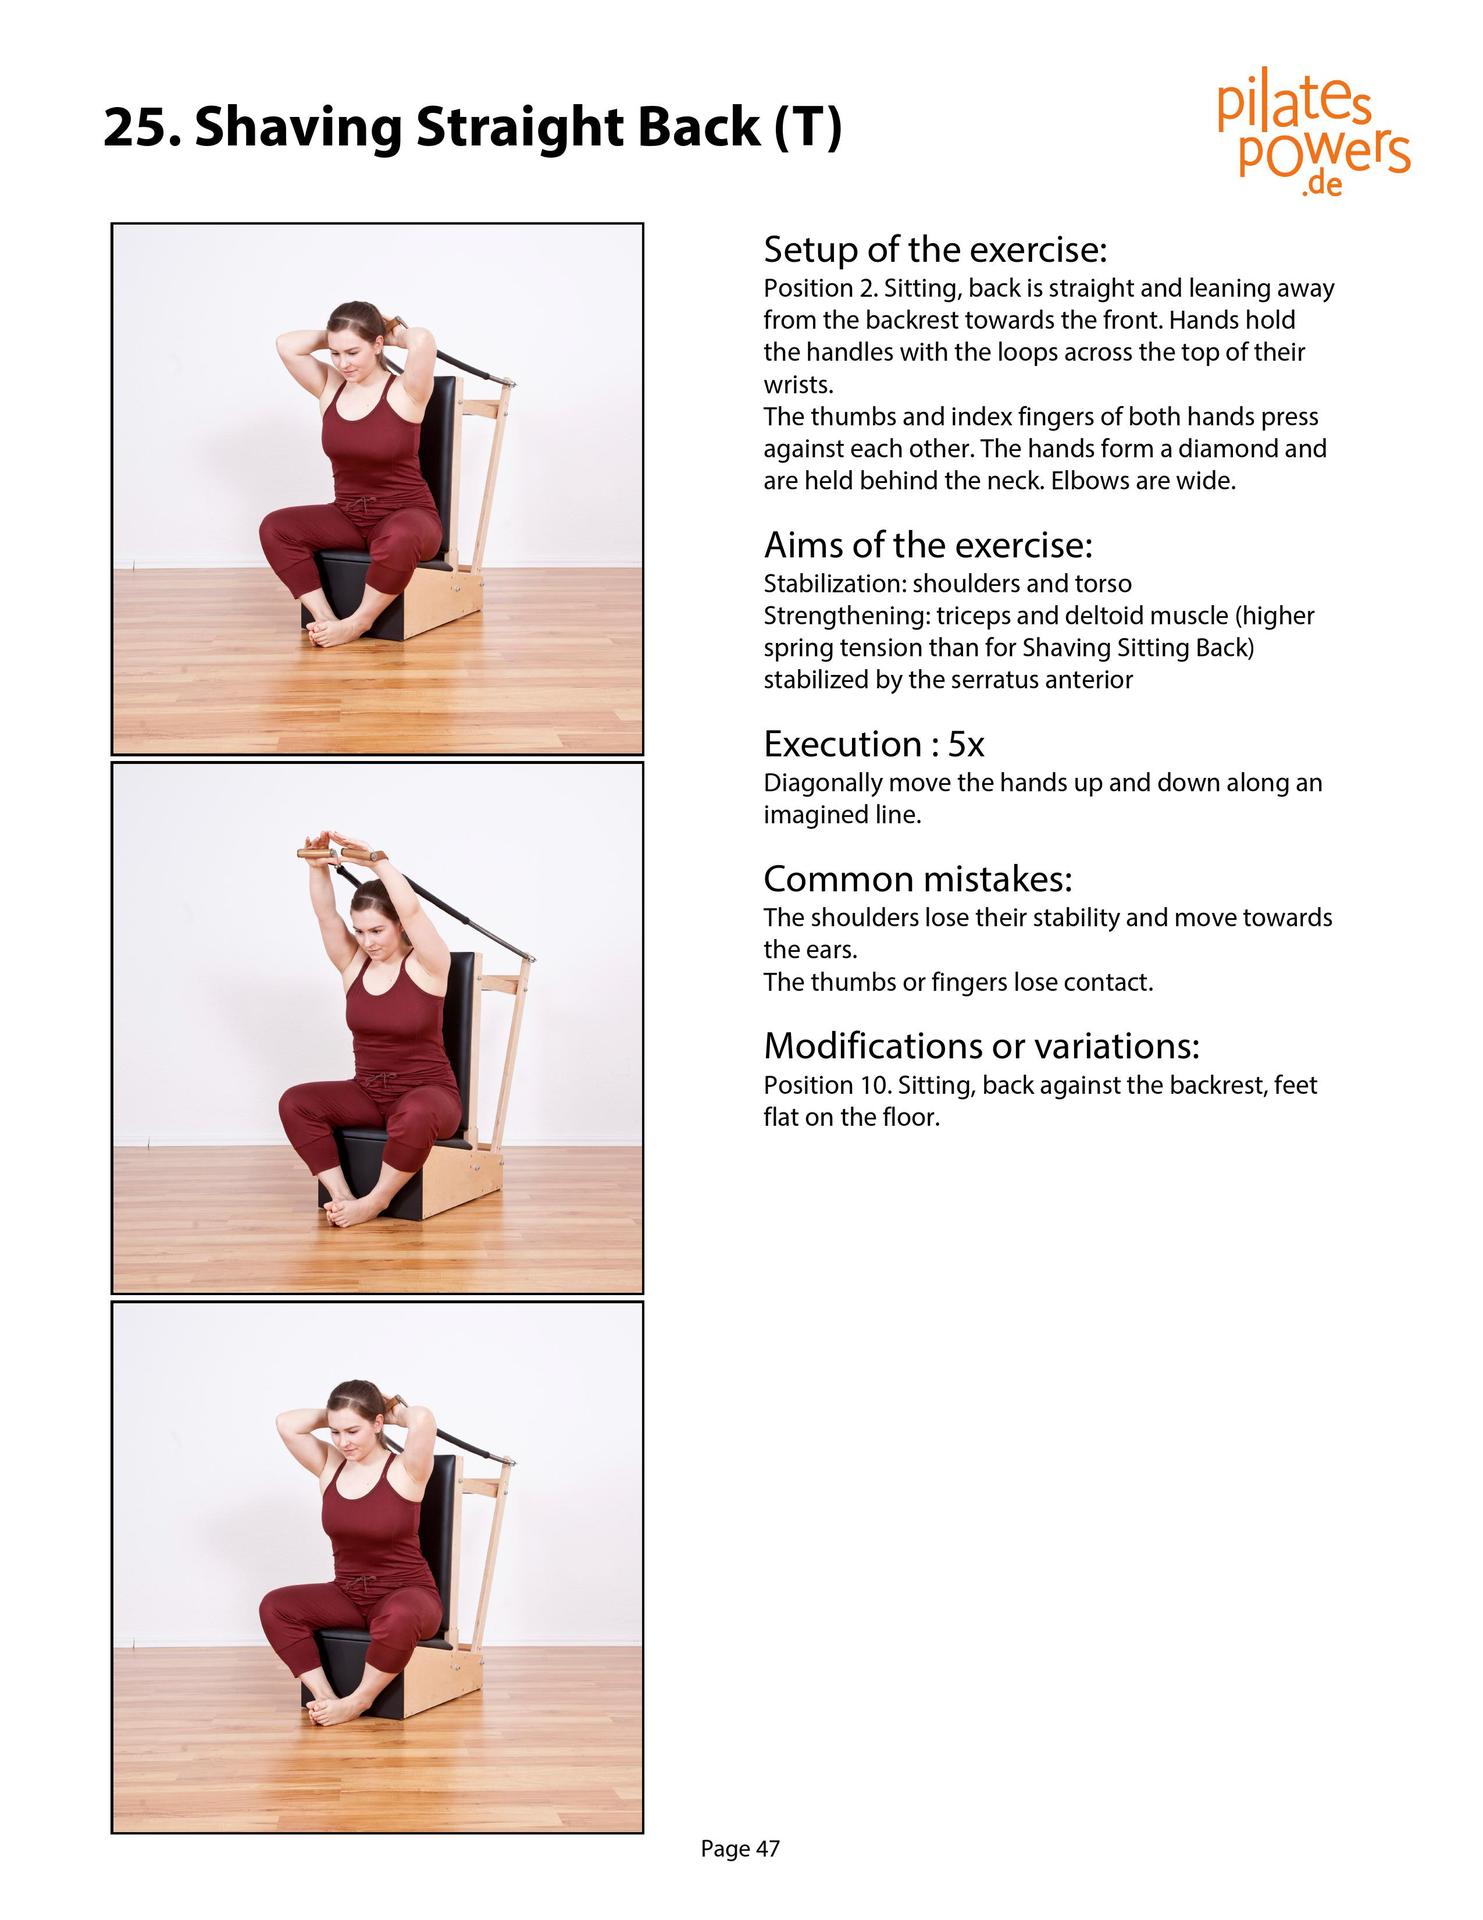 The Pilates Arm Chair The 42 most effective exercises - photo 47